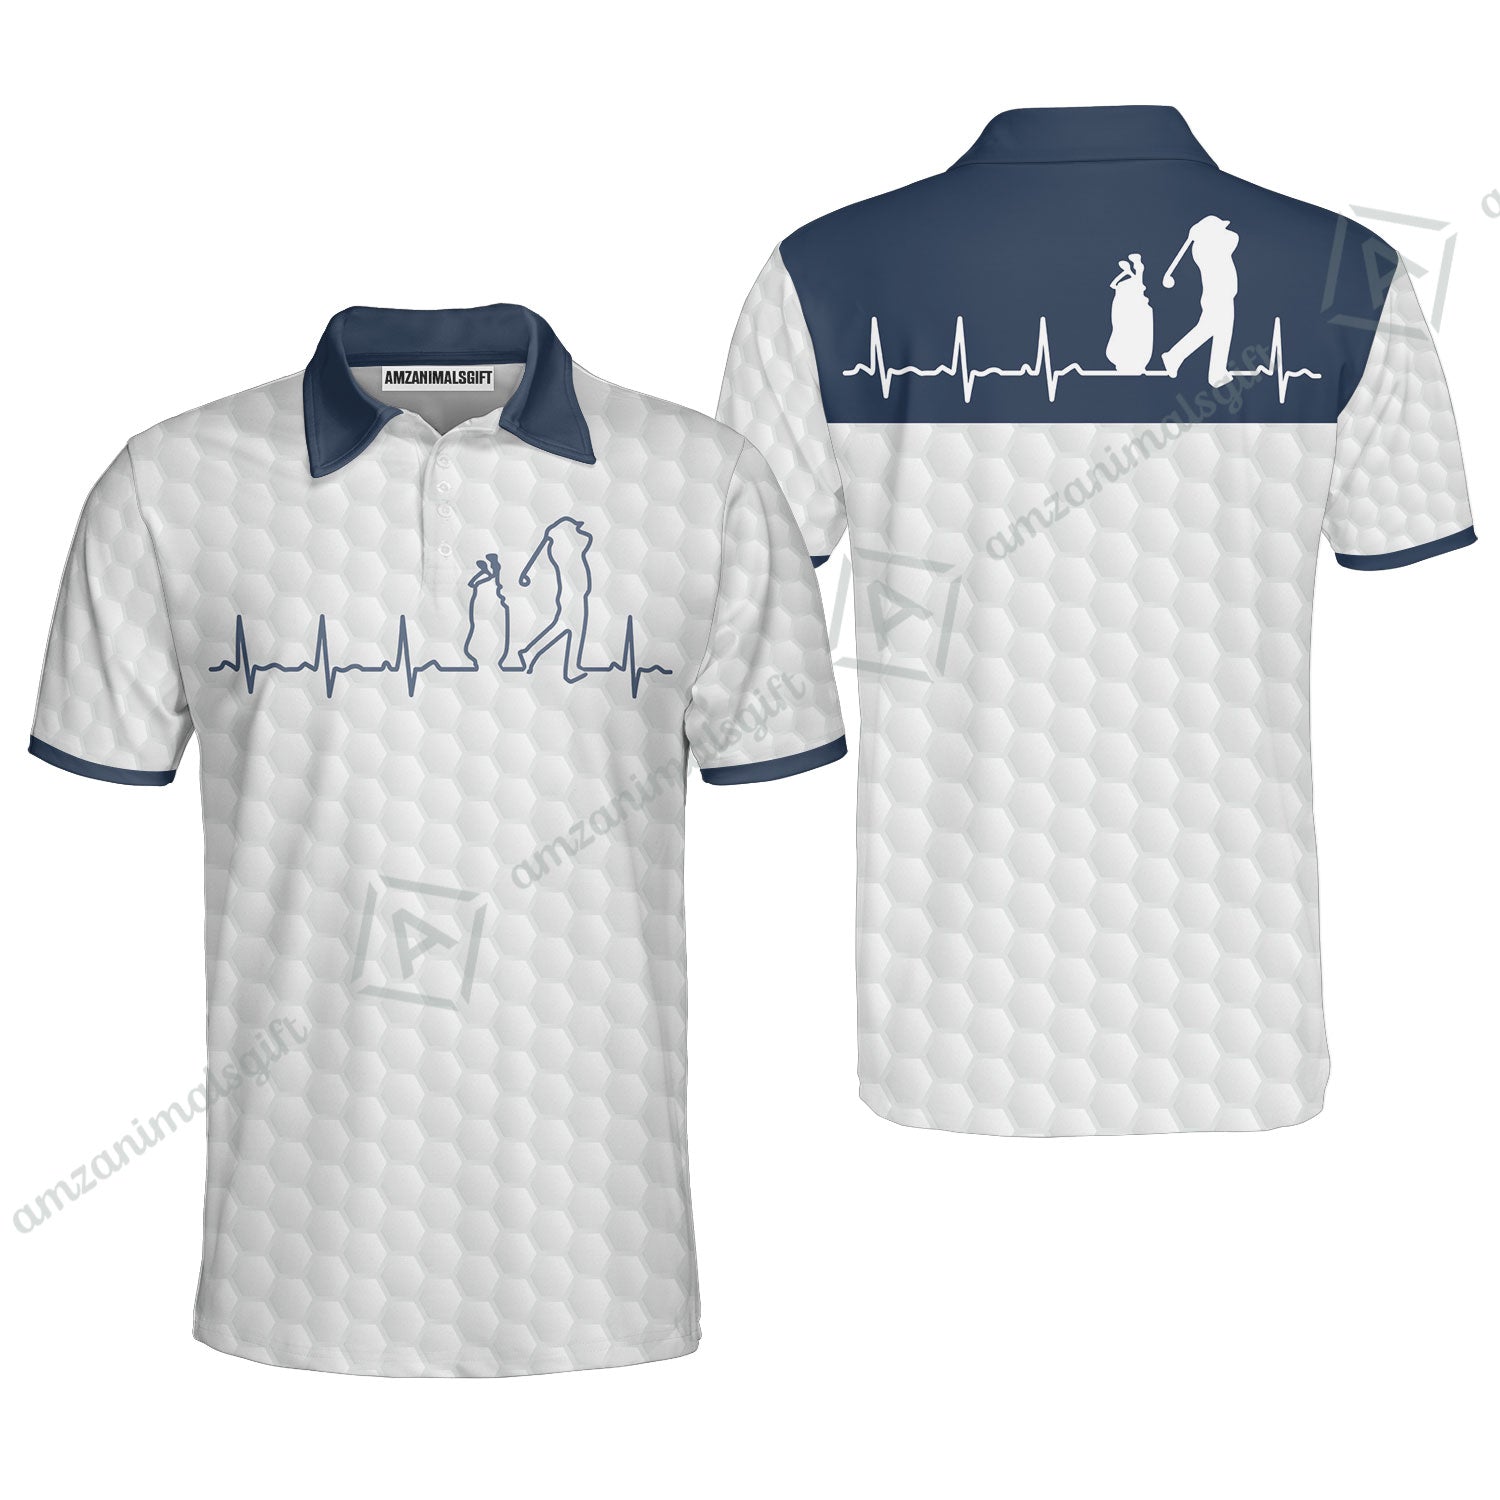 Golf Men Polo Shirt - Heartbeat Golfer White And Navy Golf Men Polo Shirt, White Golf Ball Pattern Polo Shirt - Best Gift For Golfers